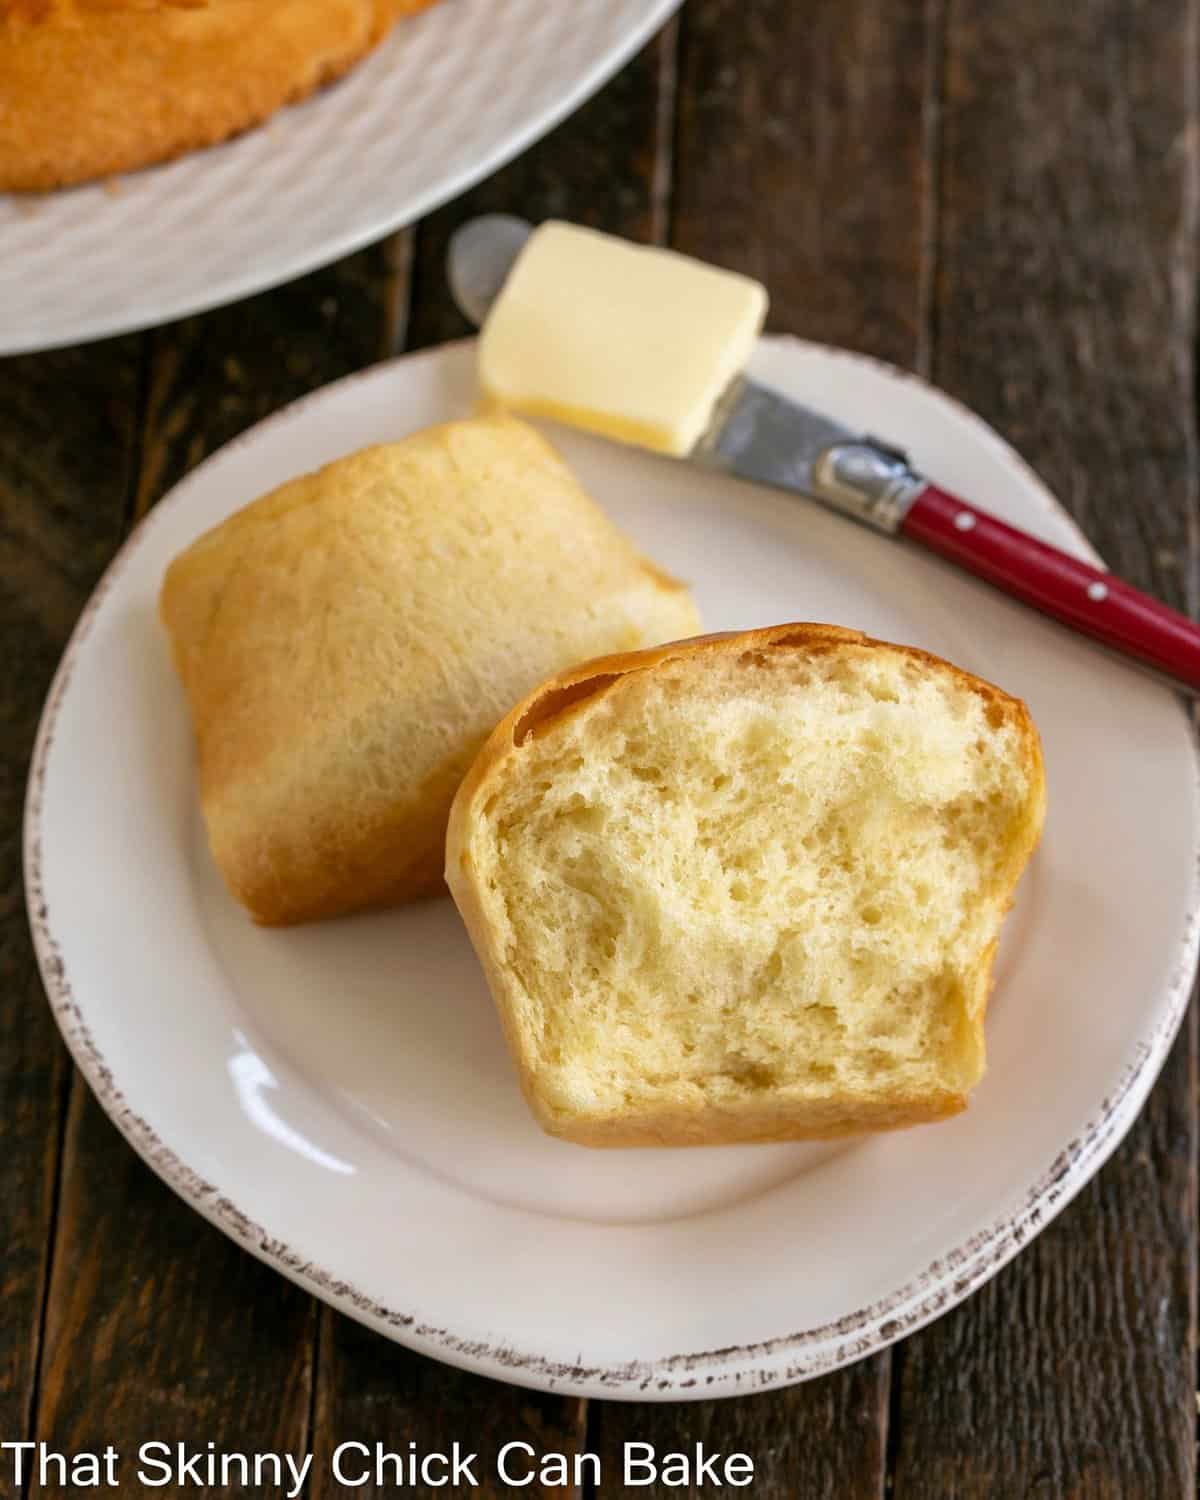 A Japanese Milk Bread Bun torn in half on a small white plate with a red butter knife.